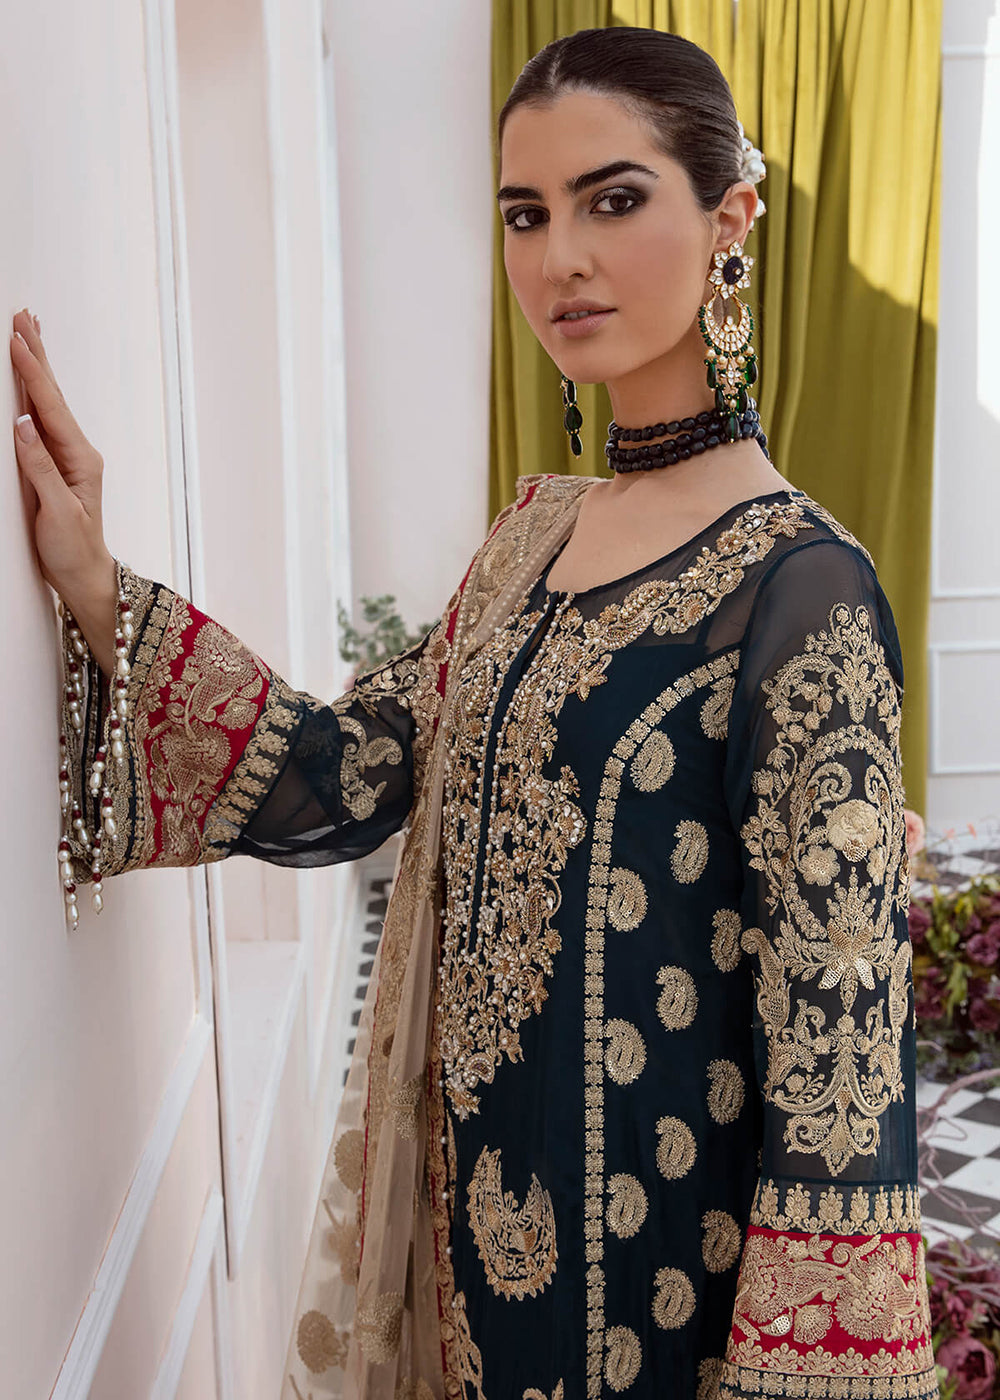 Buy Now Maia Wedding Formals 23 by Imrozia Premium | S-1075 - ONRIQUE Online in USA, UK, Canada & Worldwide at Empress Clothing.